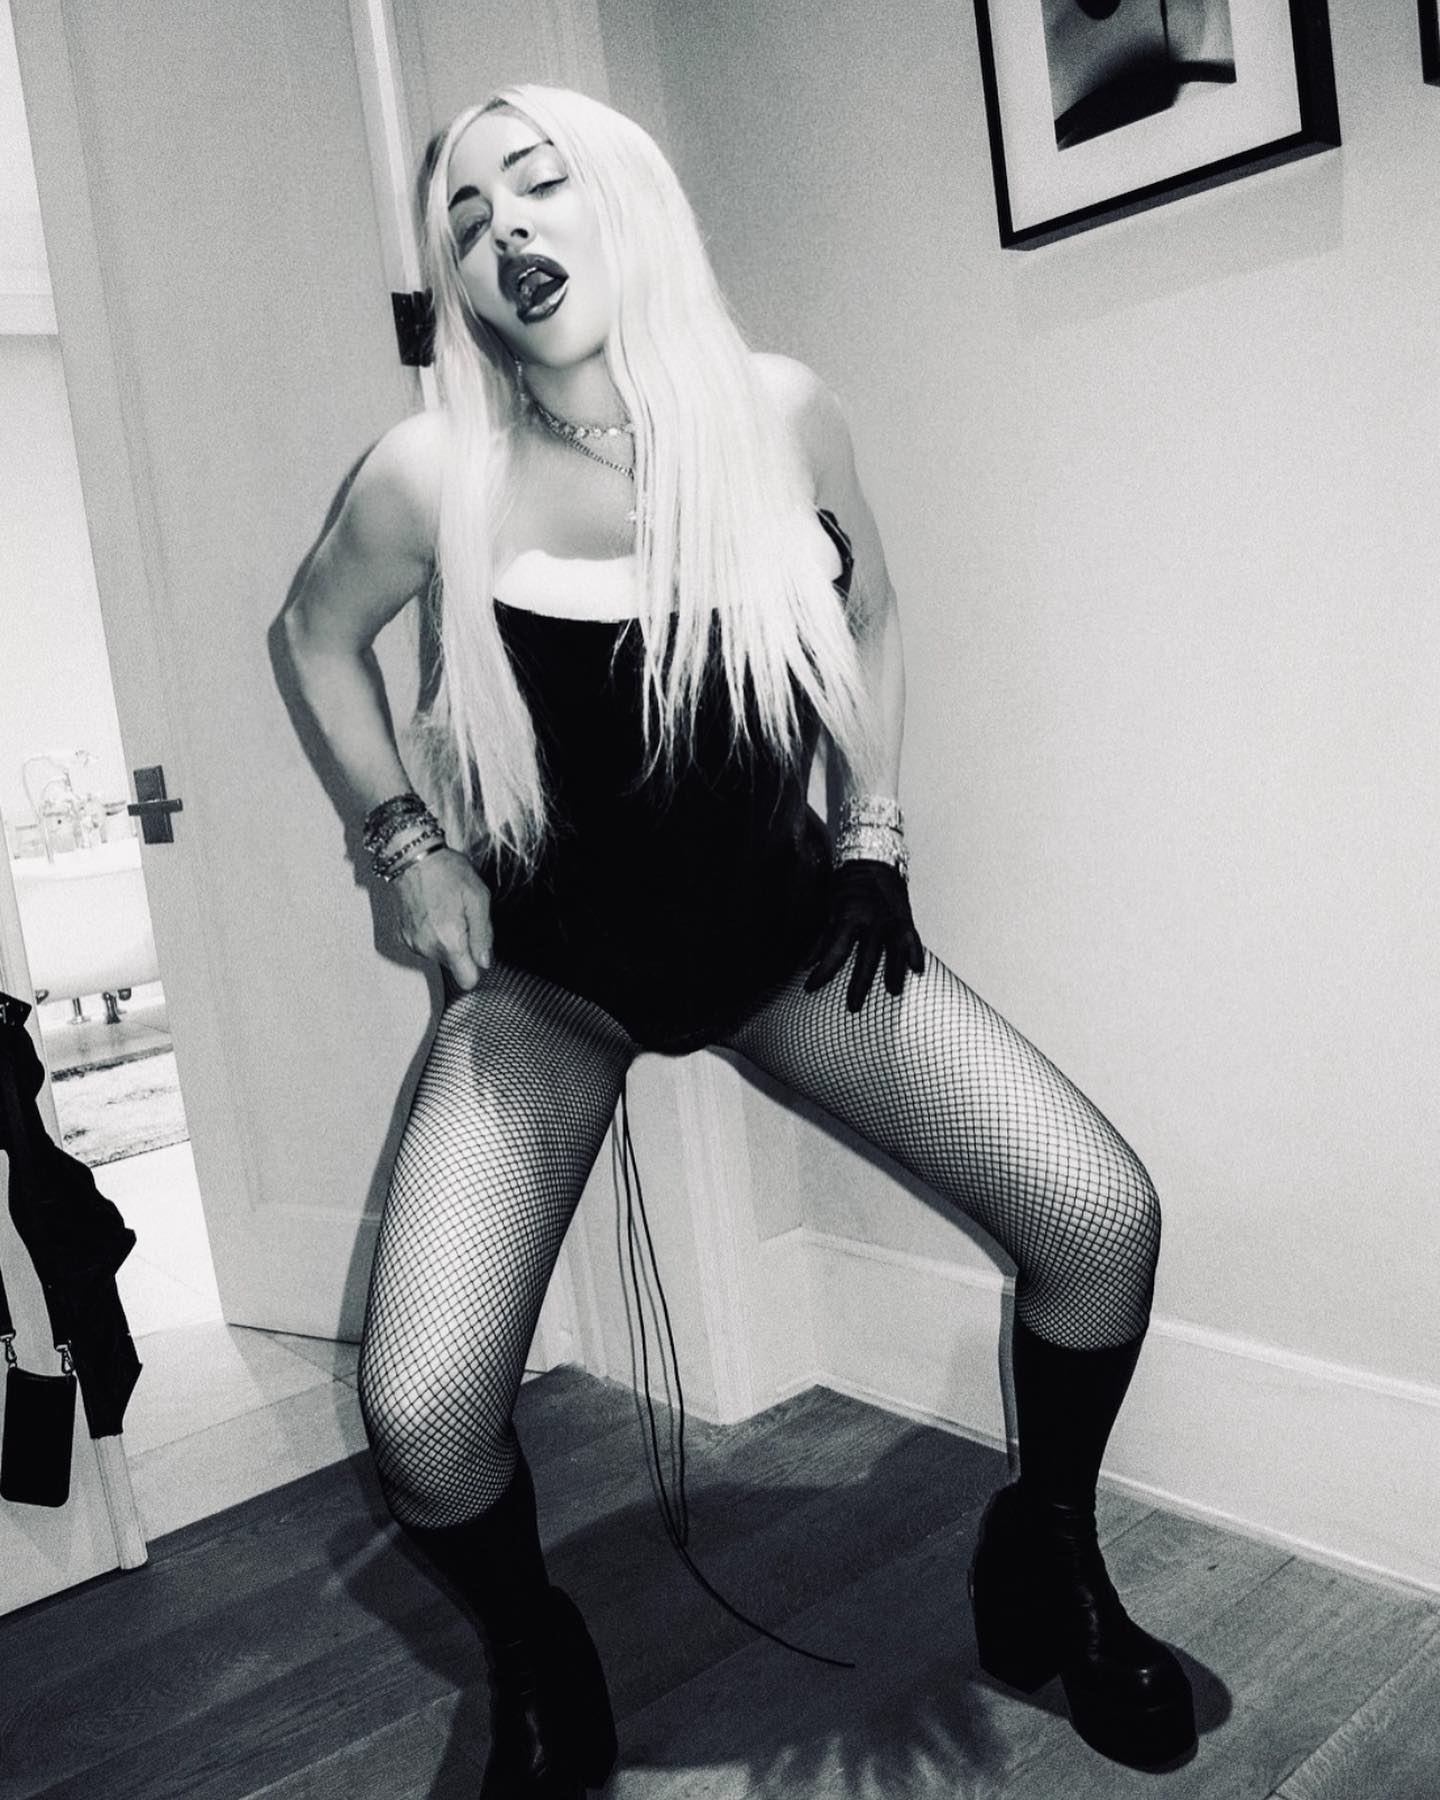 Madonna, At 63, Shows Off Her Killer Legs And Outfit In New Provocative Instagram Photos, Yours Truly, News, September 25, 2022